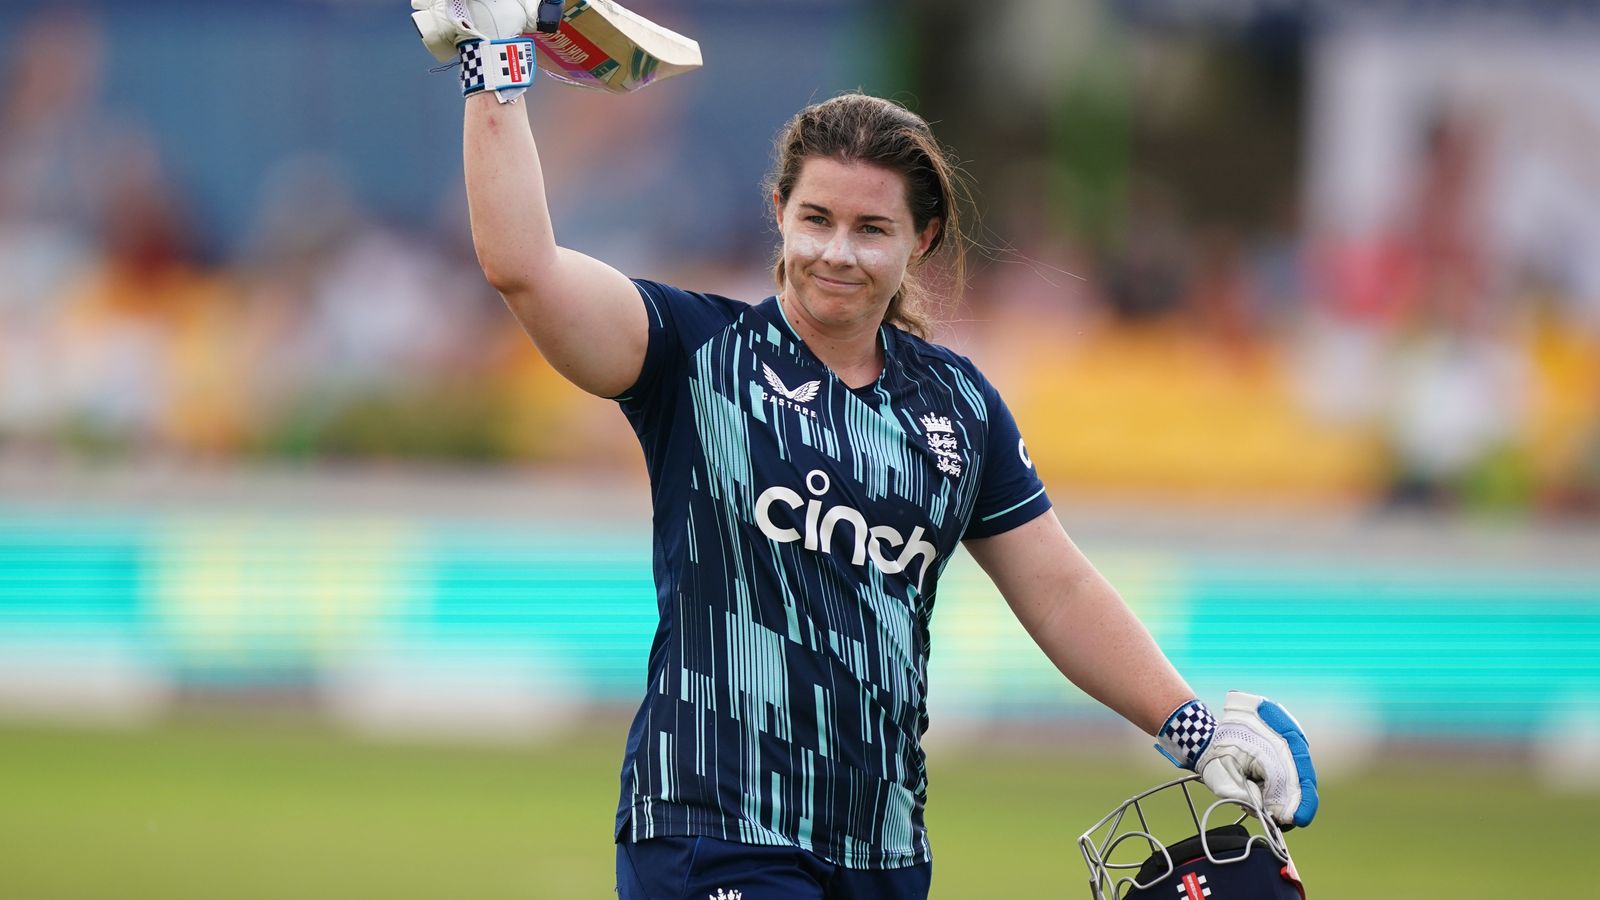 Tammy Beaumont: Lord’s is a ‘great place to play’ but it’s been ‘far too long’ since England’s women played there